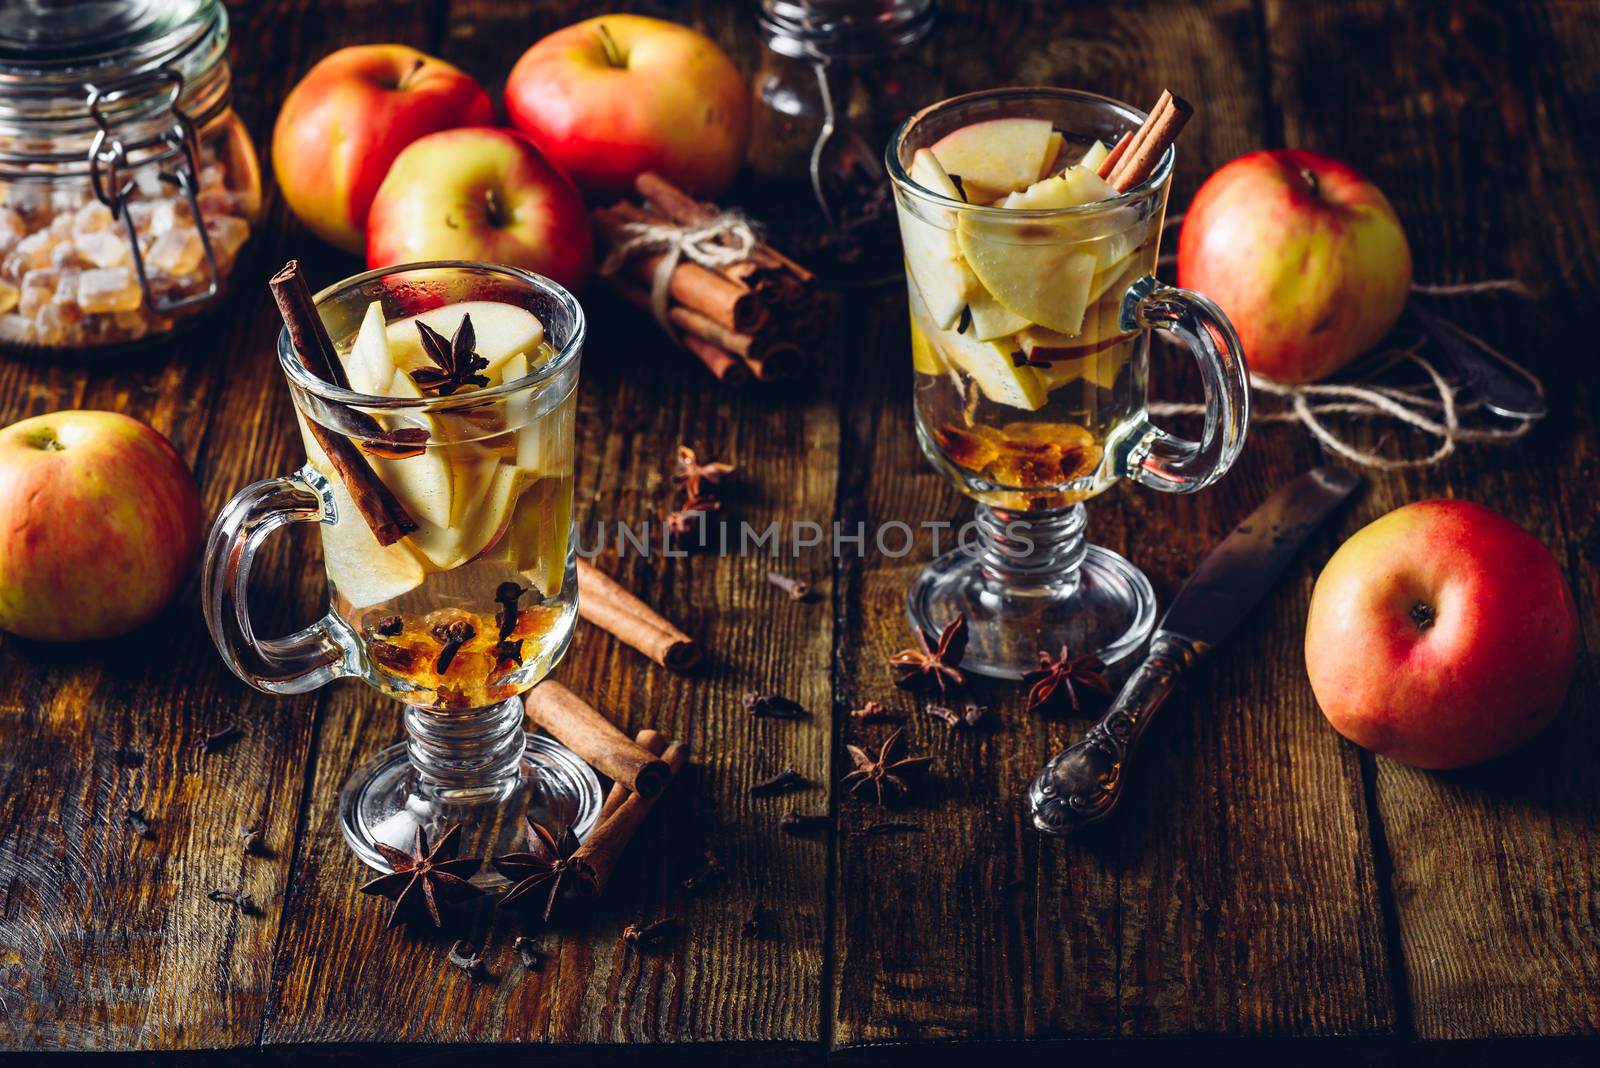 Glasses of Apple Spiced Drink with Clove, Cinnamon, Anise Star and Dark Candy Sugar. All Ingredients and Some Kitchen utensils on Wooden Table. Vertical.